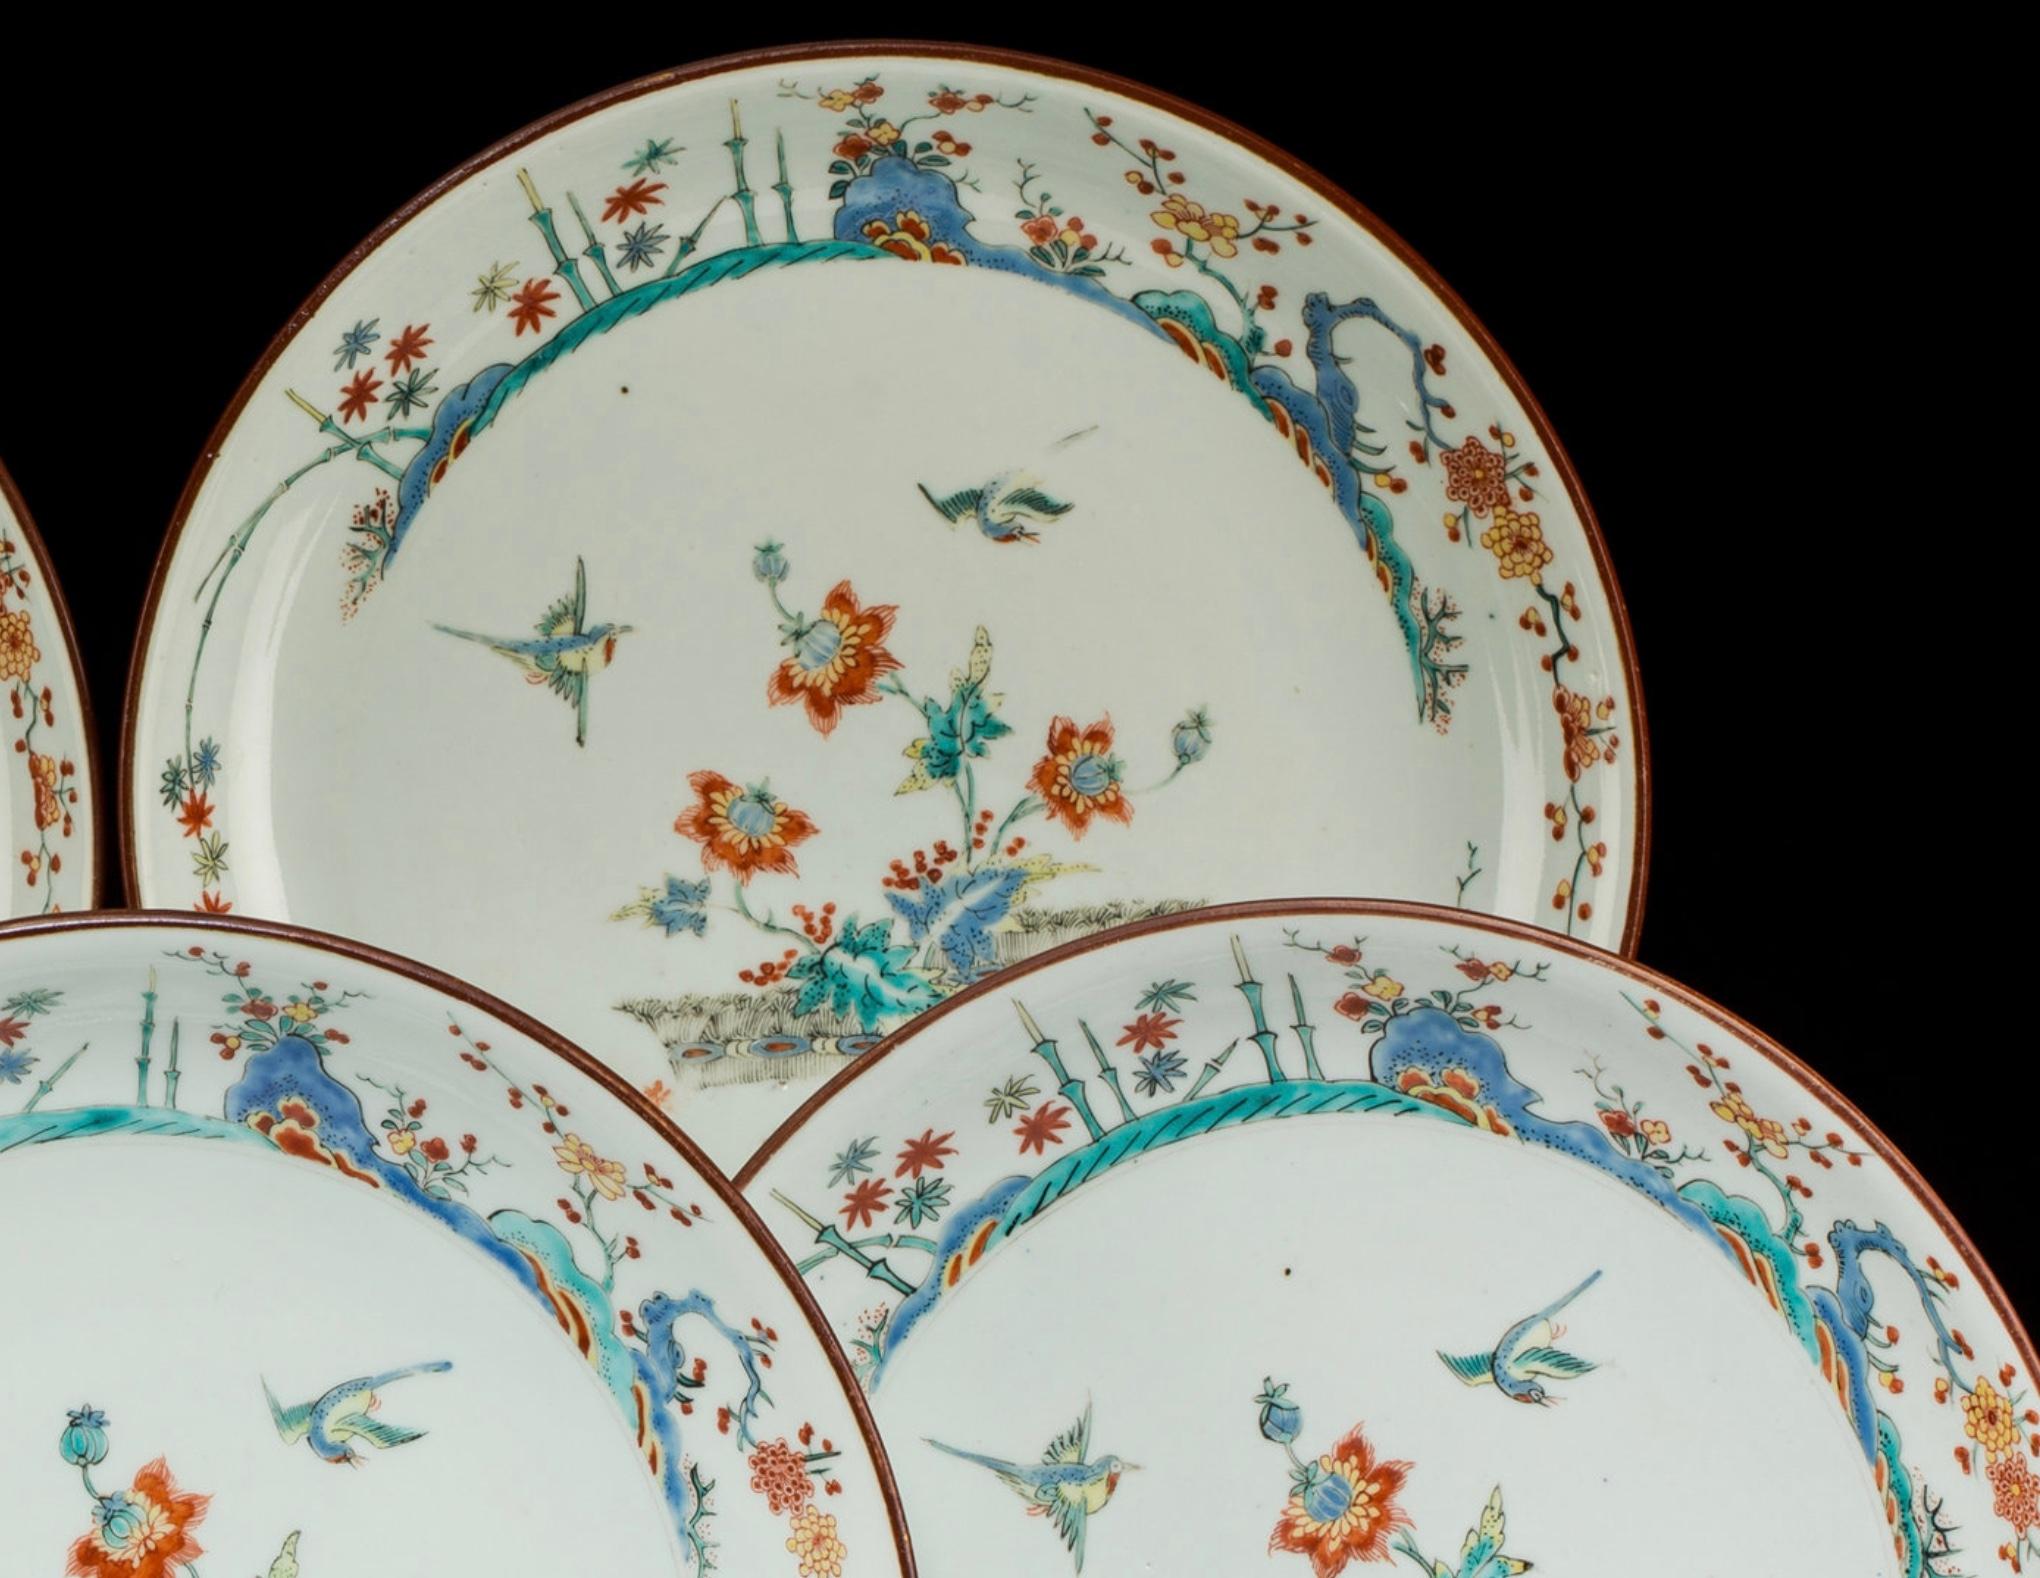 Five fine enameled porcelain either Kangxi or Quainlong plates with Japonese style Imari floral and birds motifs. They are from the Famille Vert and Famille rose schools with vibrant colors on milk white china.

Size: 9.2 inch diameter (23.2